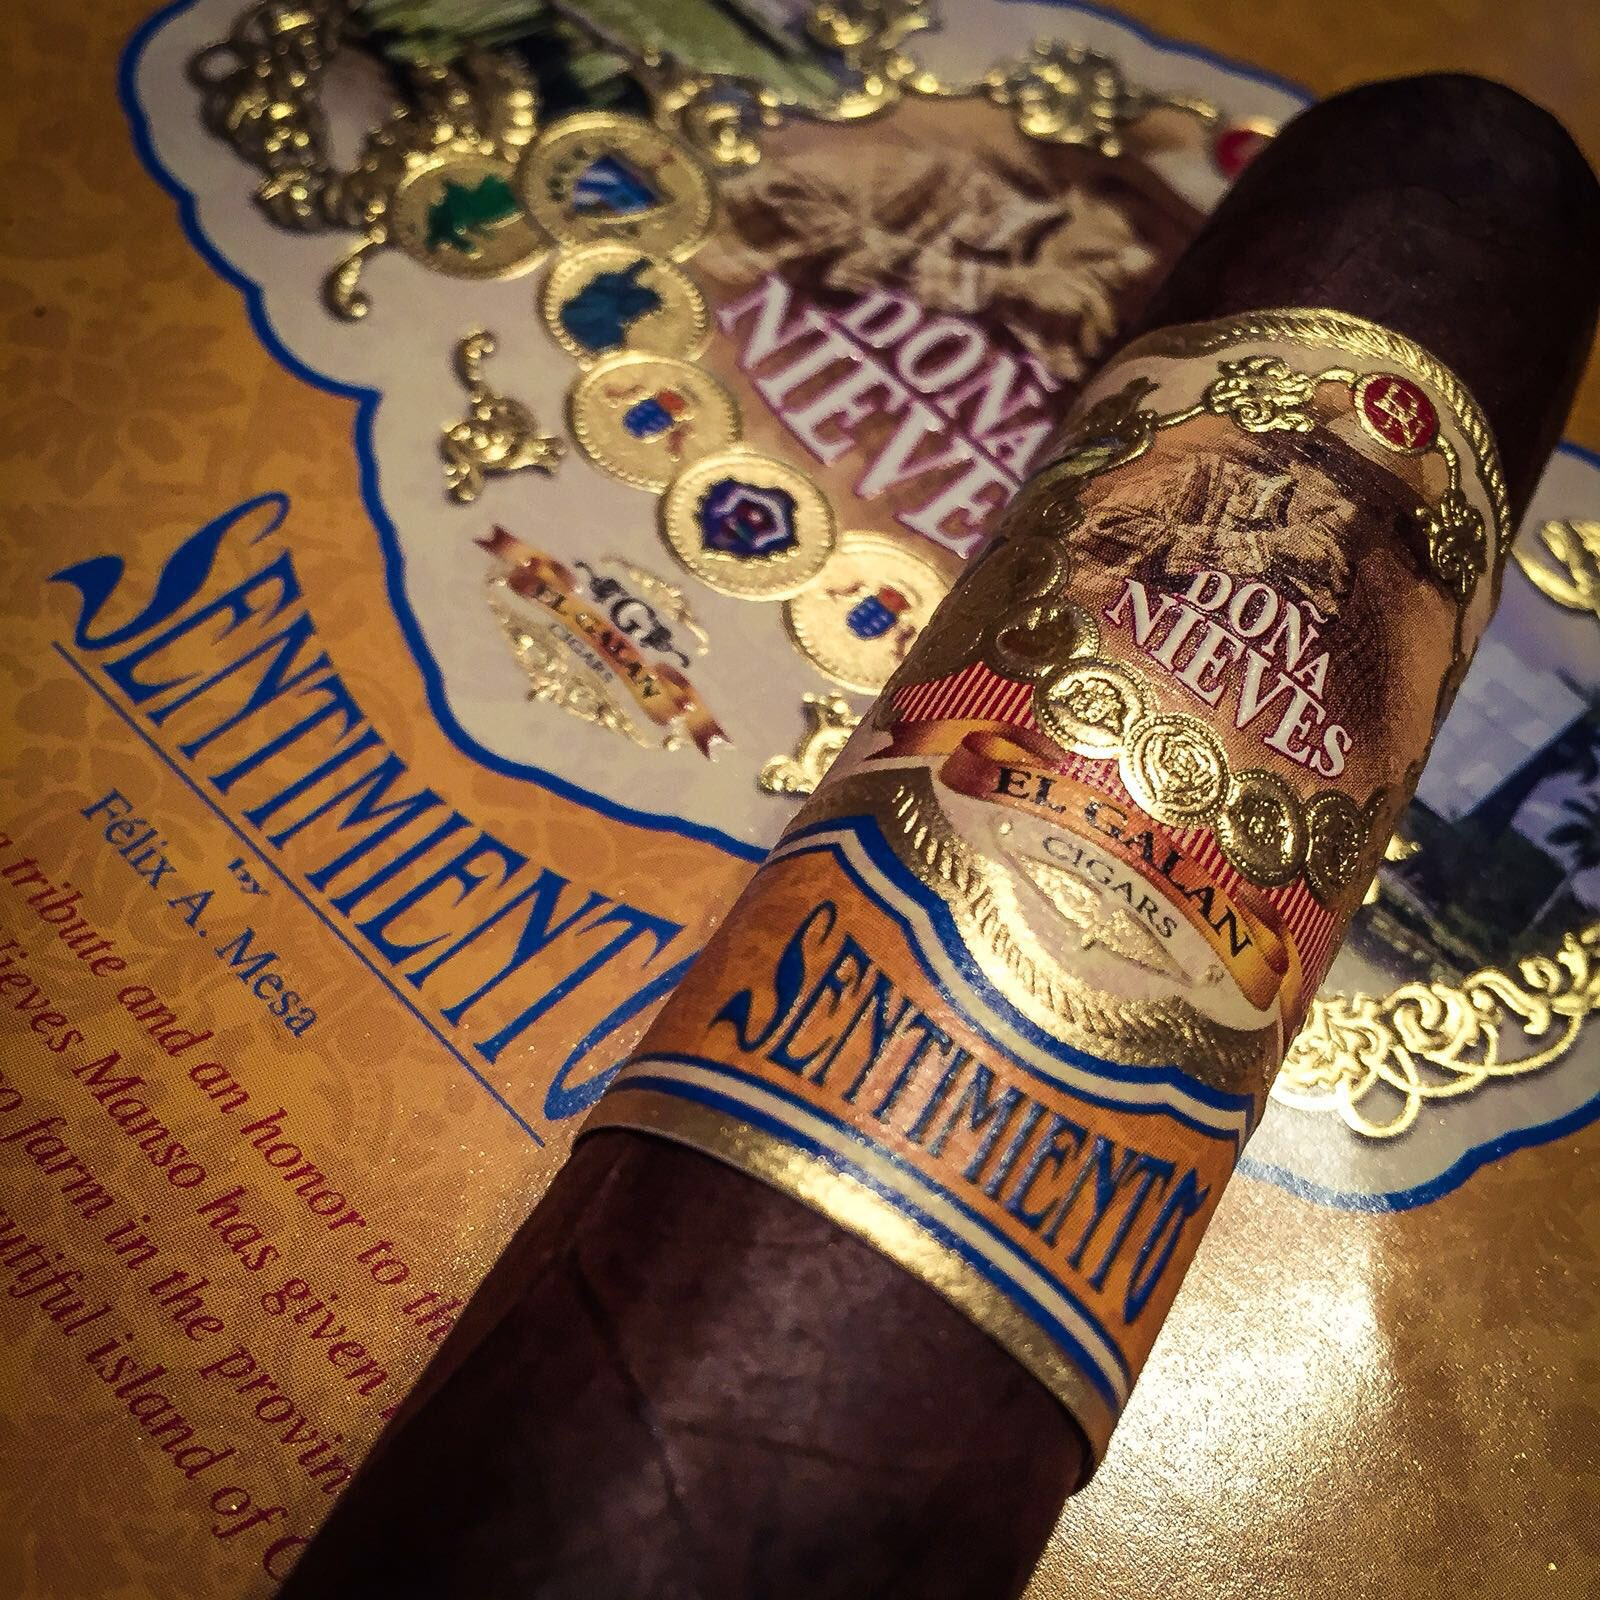 A picture of Dona Nieves Sentimiento cigar